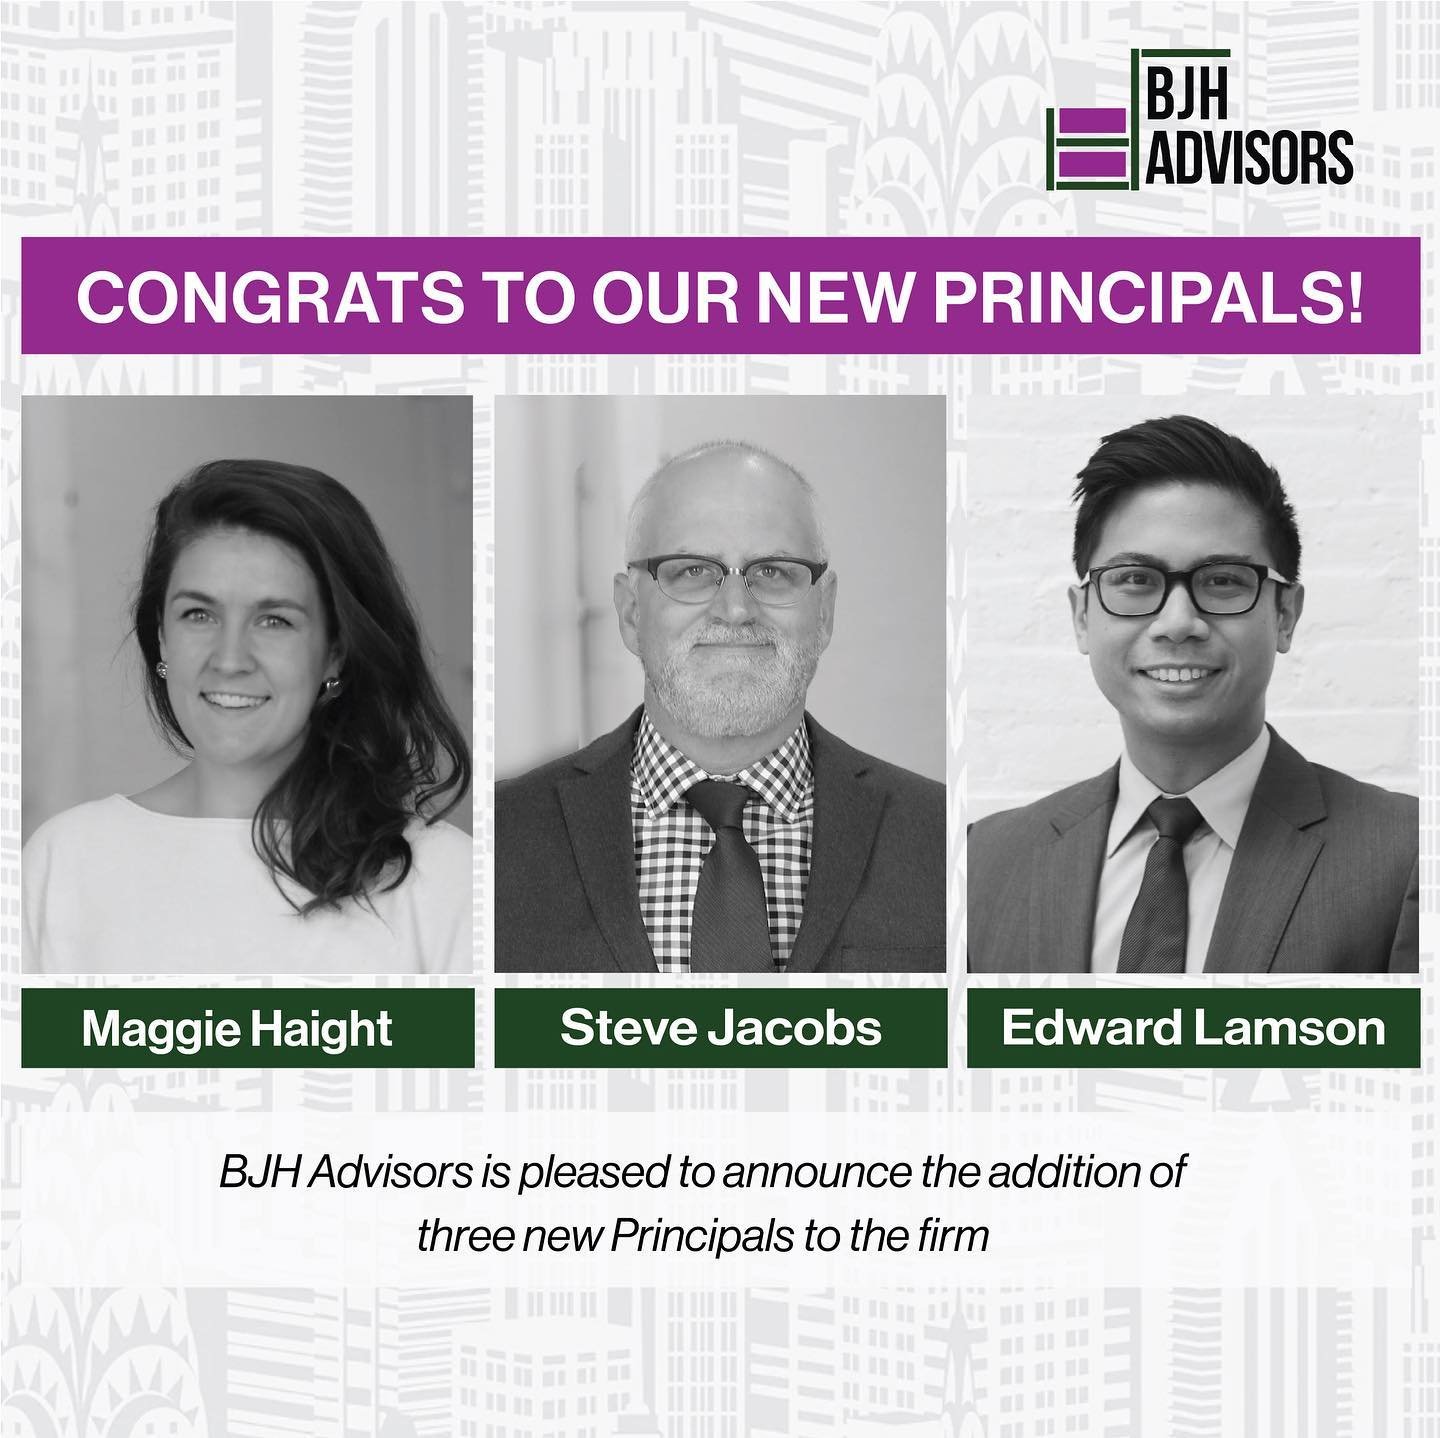 BJH Advisors is excited to announce the addition of three new Principals to the firm! The new Principals are a talented group of real estate and urban planning professionals working across a range of growing practice areas. Steve Jacobs and Edward La